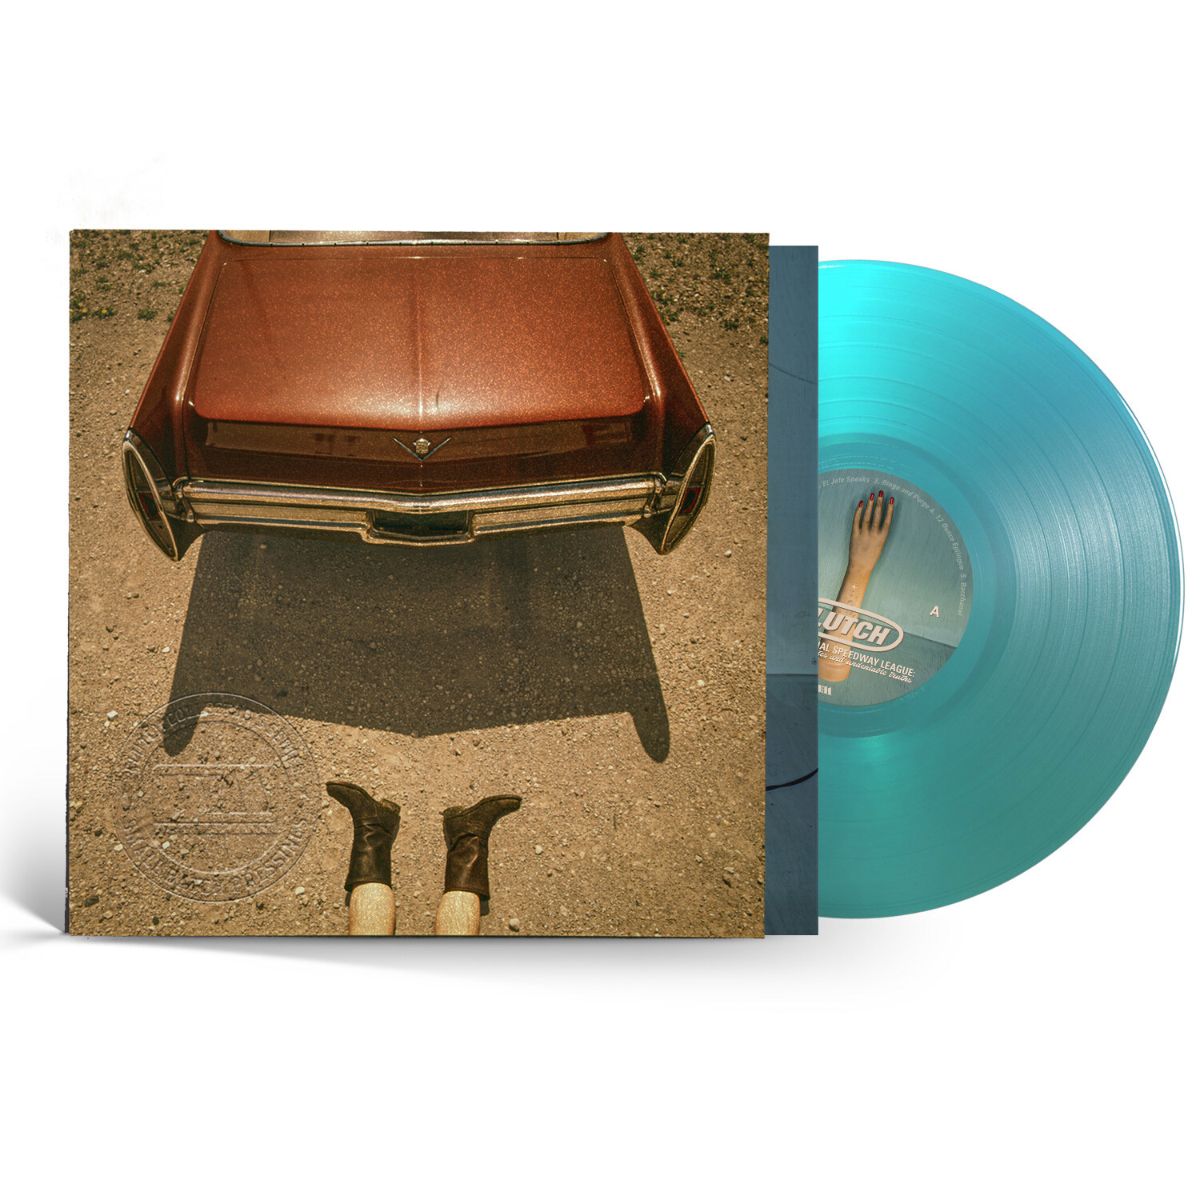 Clutch - Transnational Speedway League: Limited 'Sea Glass Blue' Vinyl LP (w/ Signed & Numbered Insert)